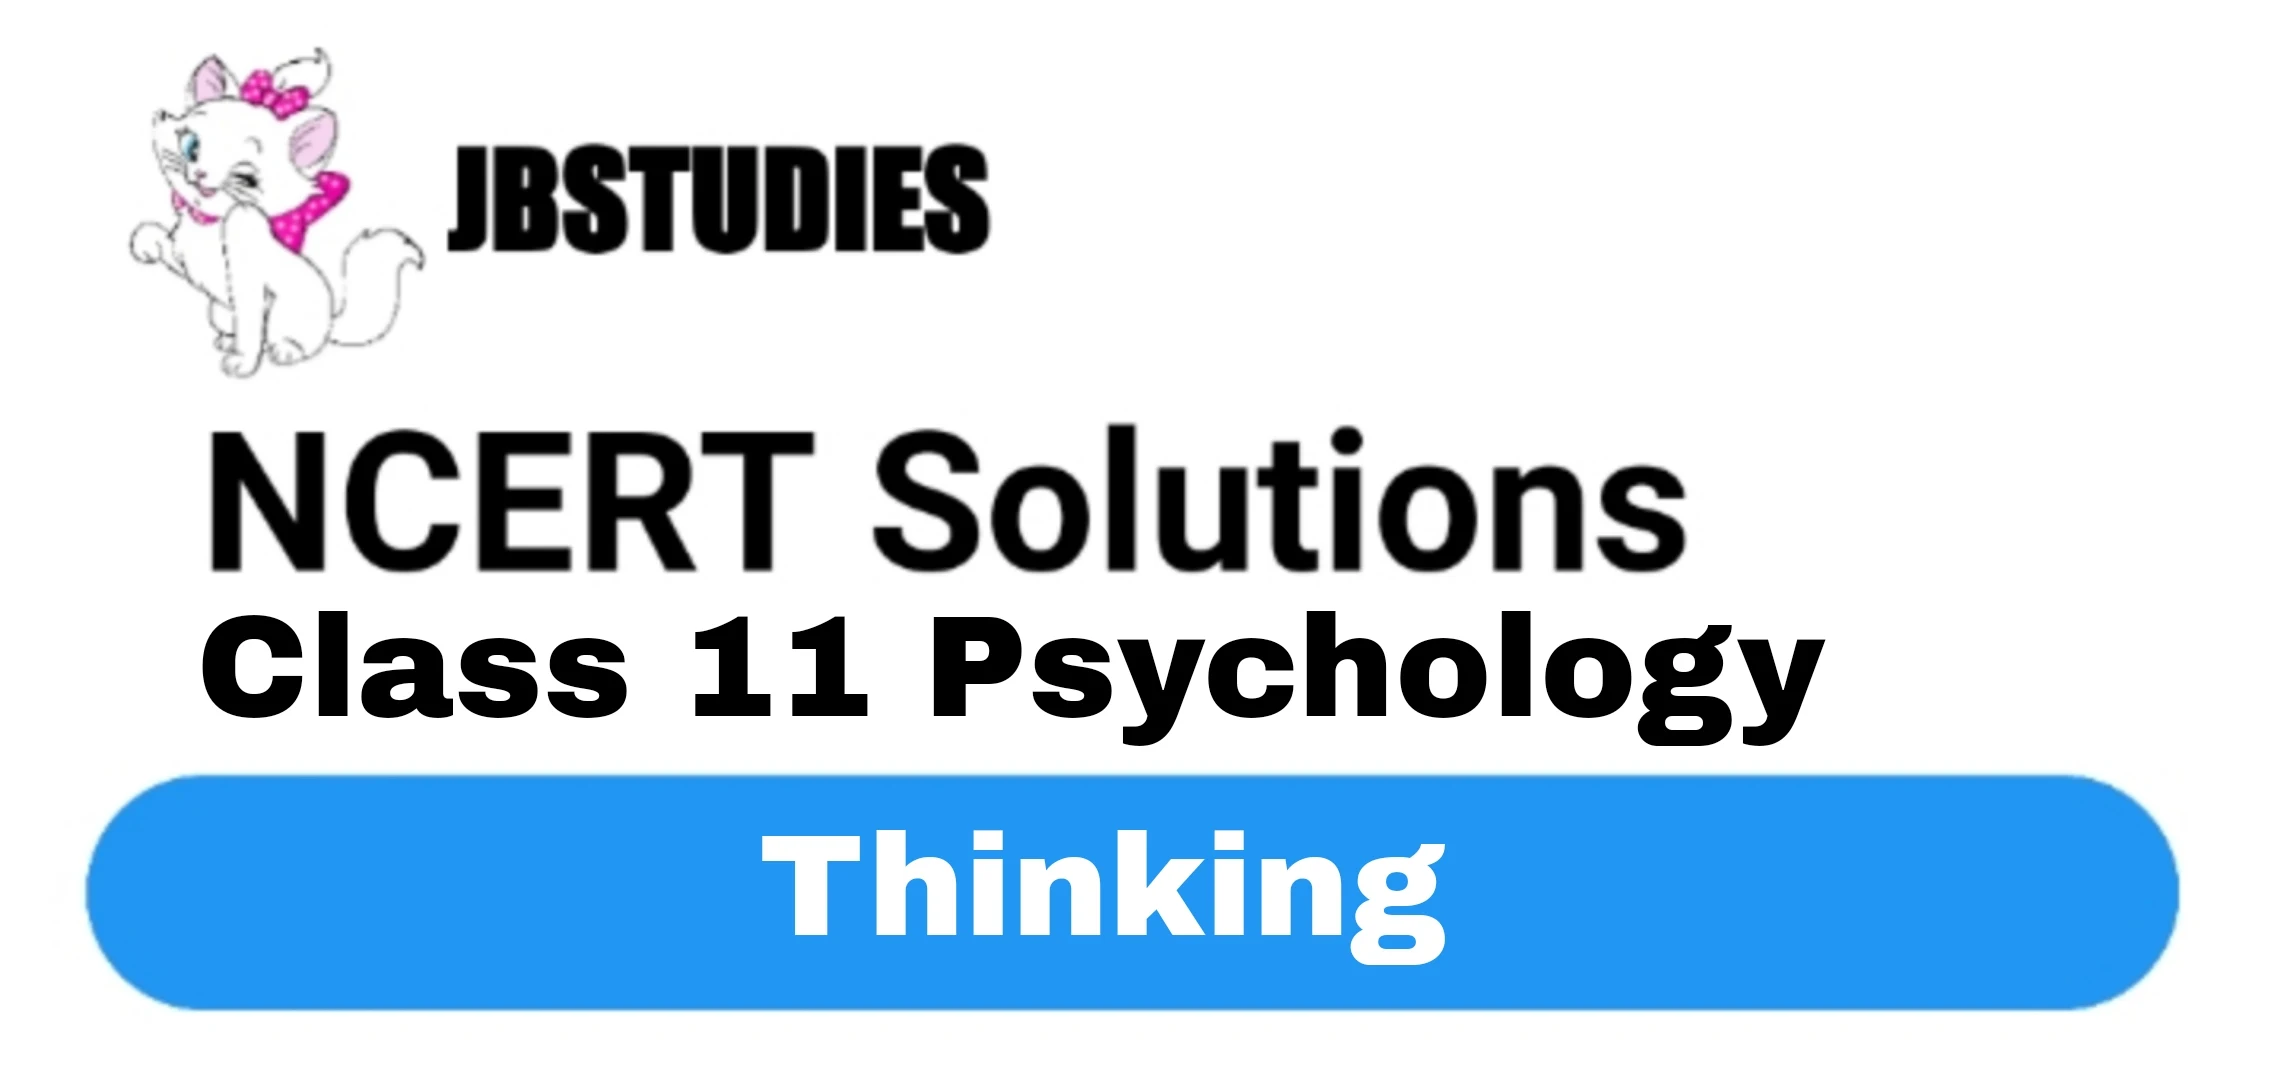 Solutions Class 11 Psychology Chapter -8 (Thinking)